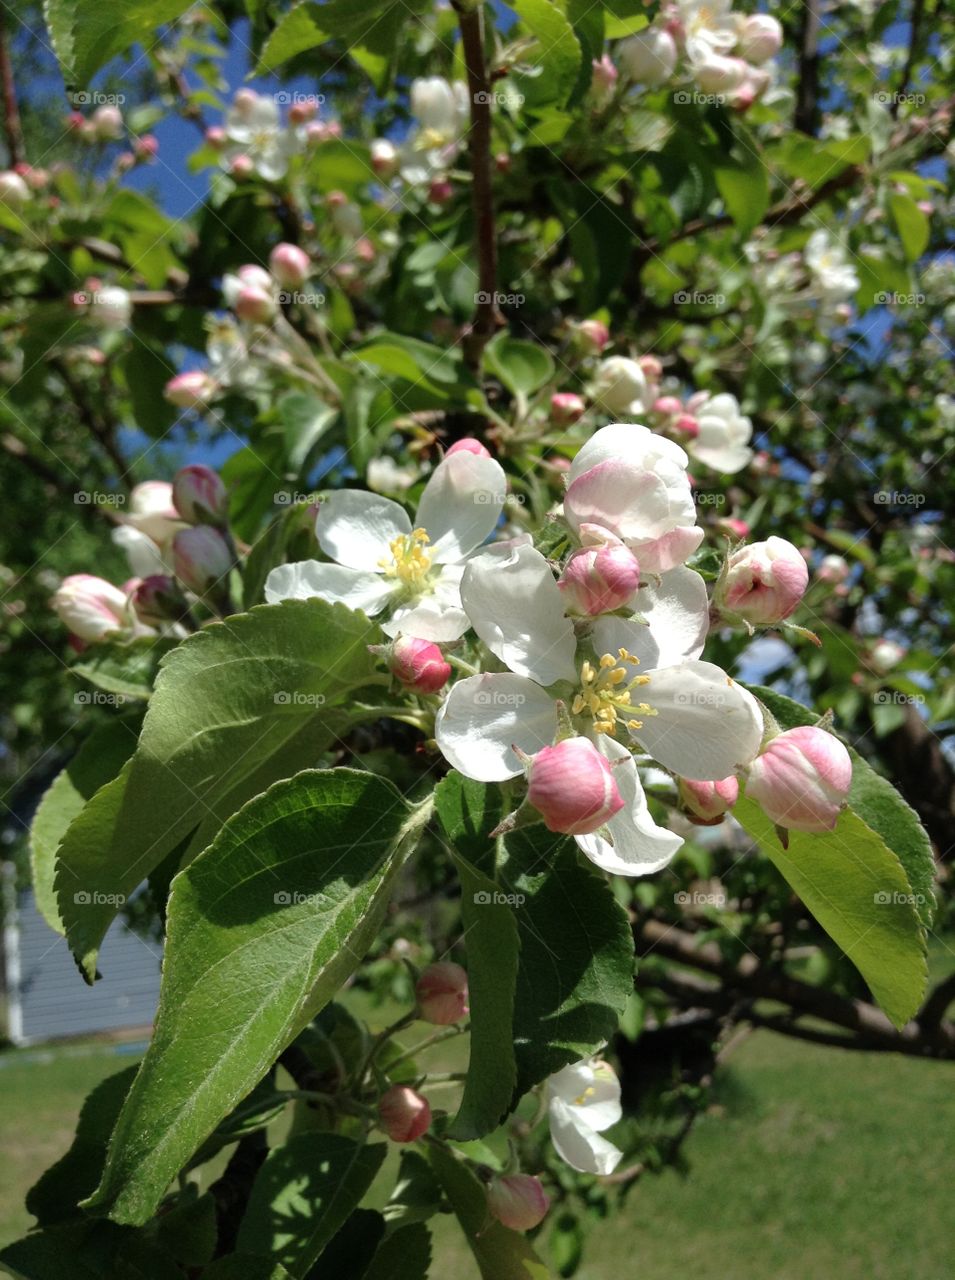 Apple Blossom. Bees a work